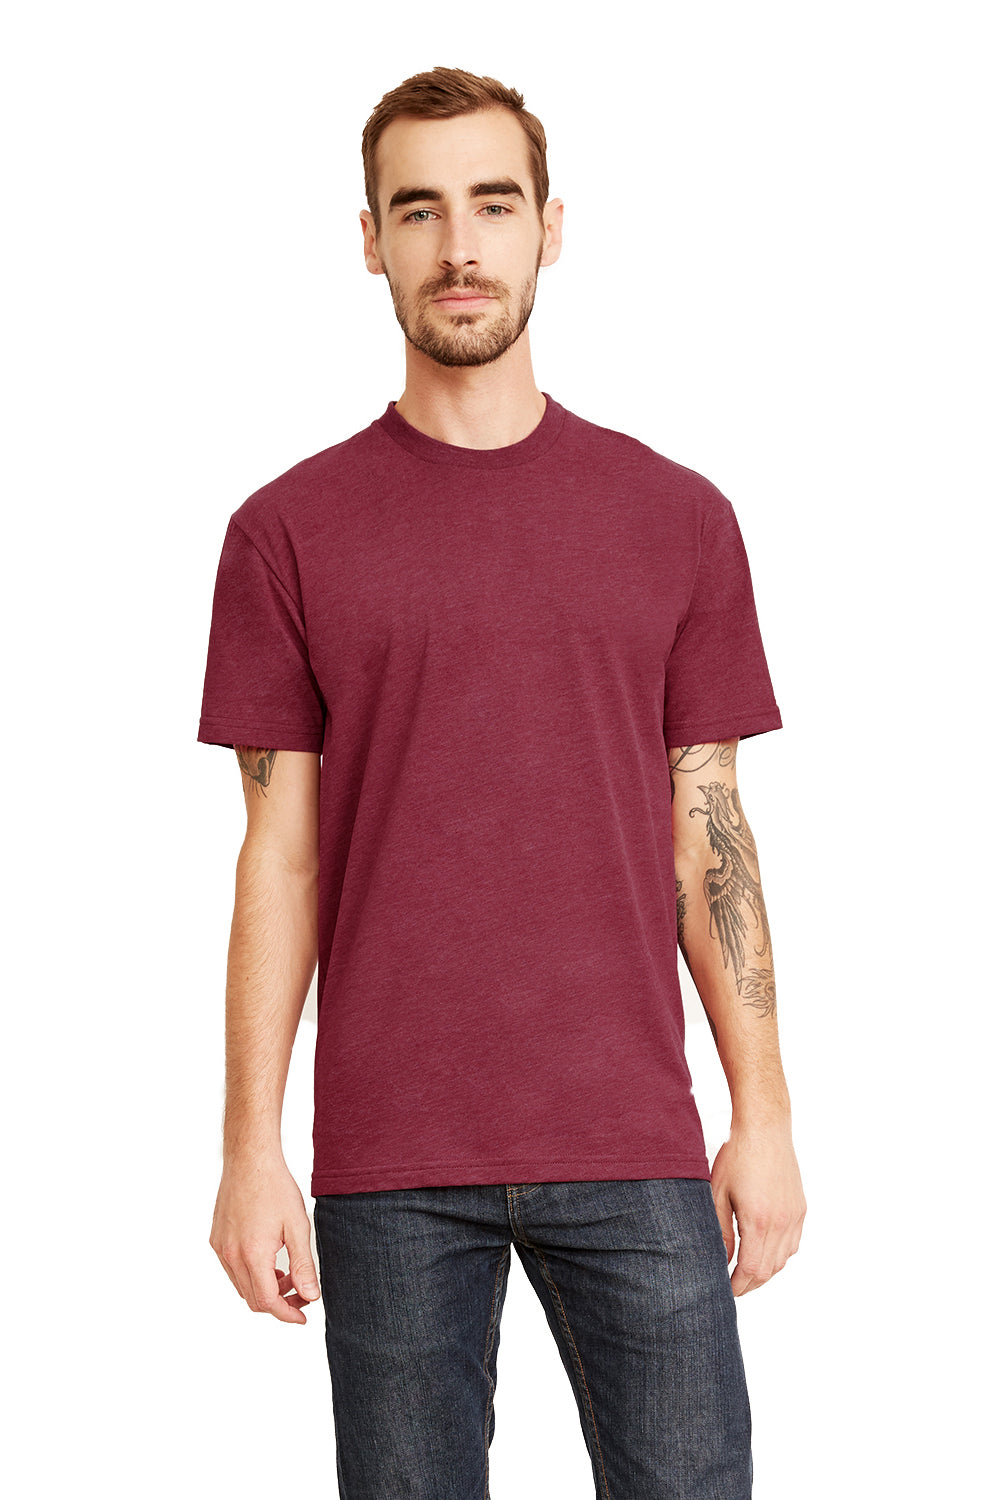 Next Level 6410 Mens Sueded Jersey Short Sleeve Crewneck T-Shirt Heather Maroon Front